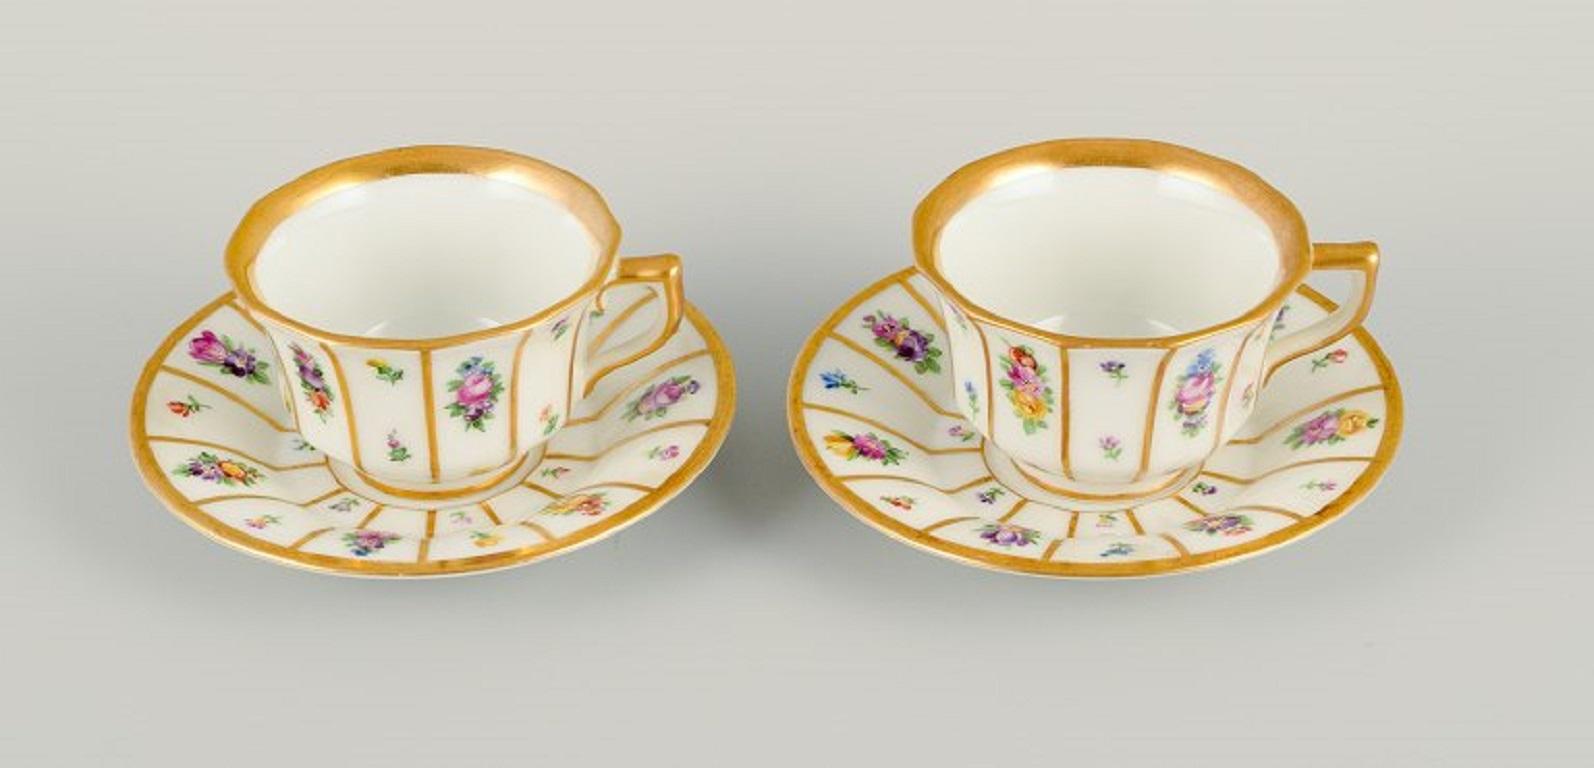 Royal Copenhagen, Henriette. Hand-painted porcelain with gold rim.
Two mocha cups.
Model number 444/8562.
First factory quality.
In perfect condition.
Measures 5.5 x 9.5 cm.
Saucer 12.0 cm.